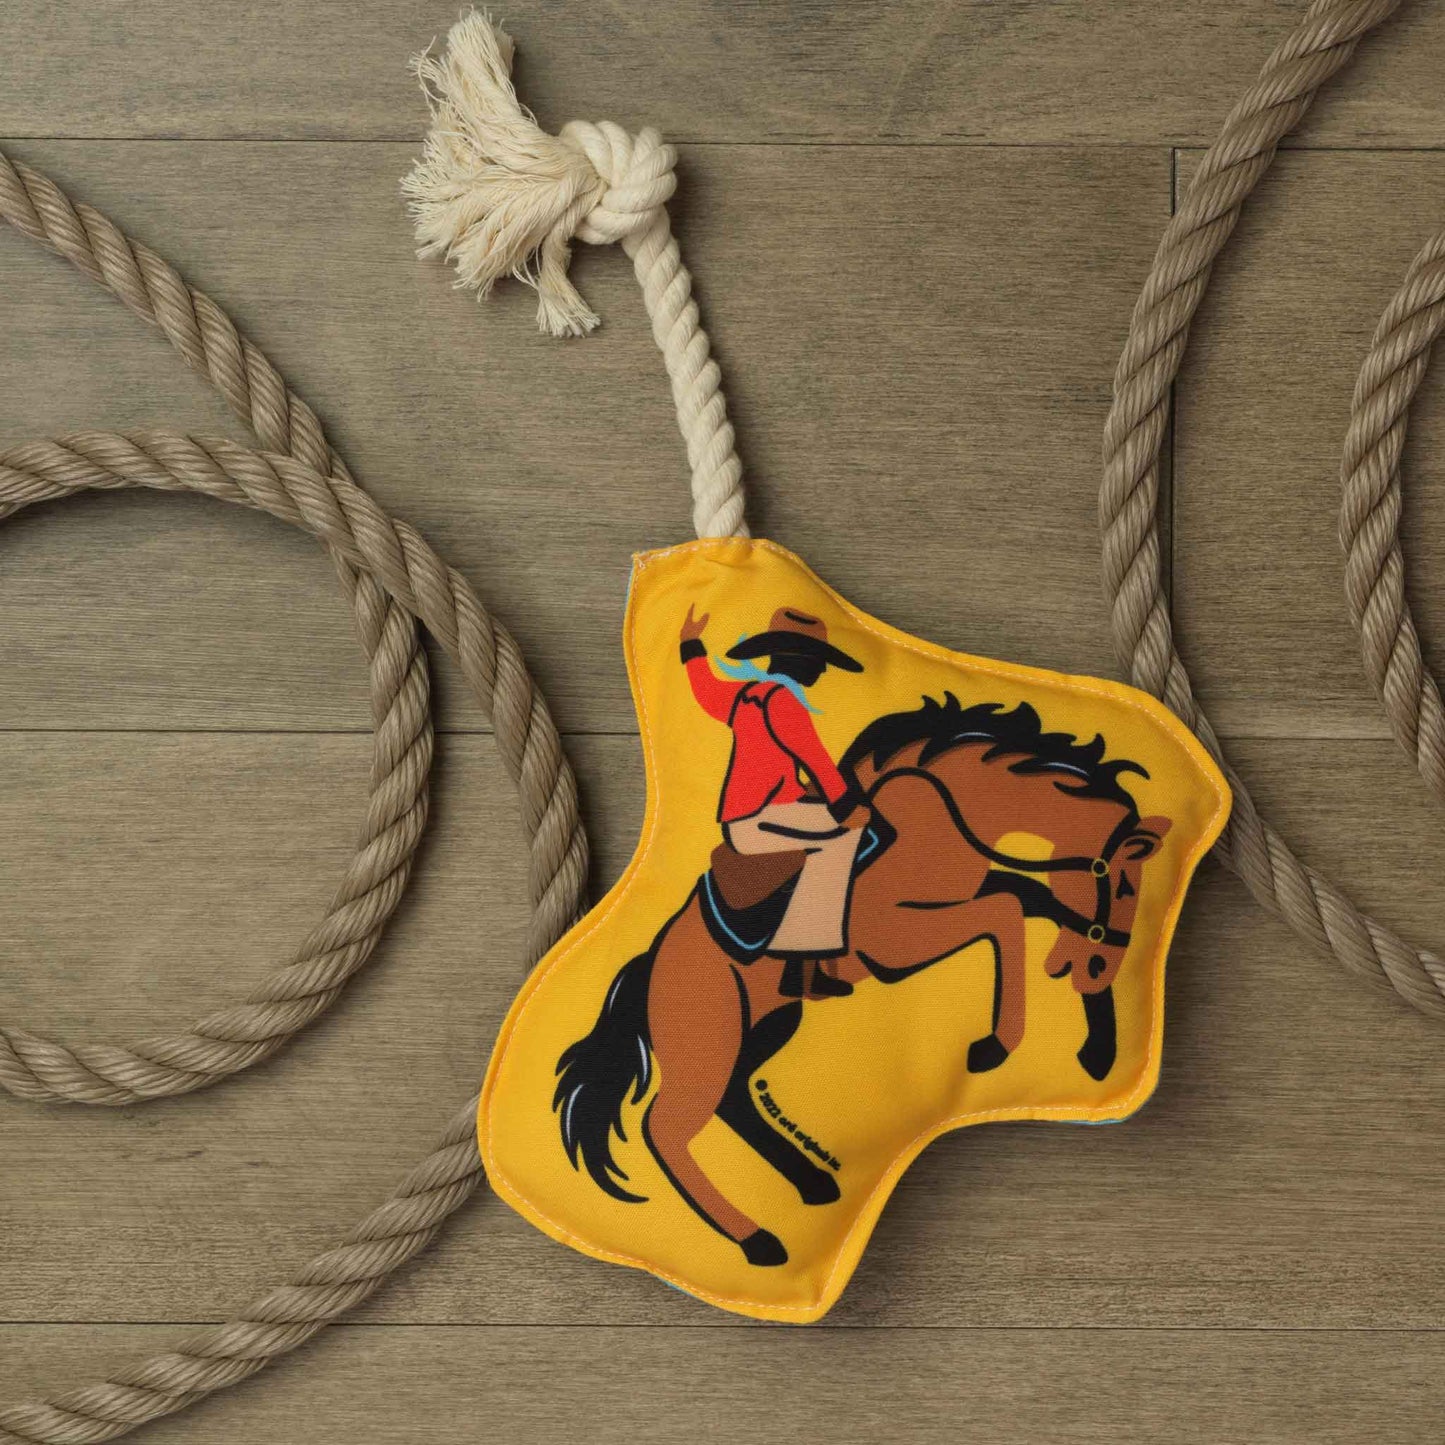 Rope Dog Toy - Rodeo